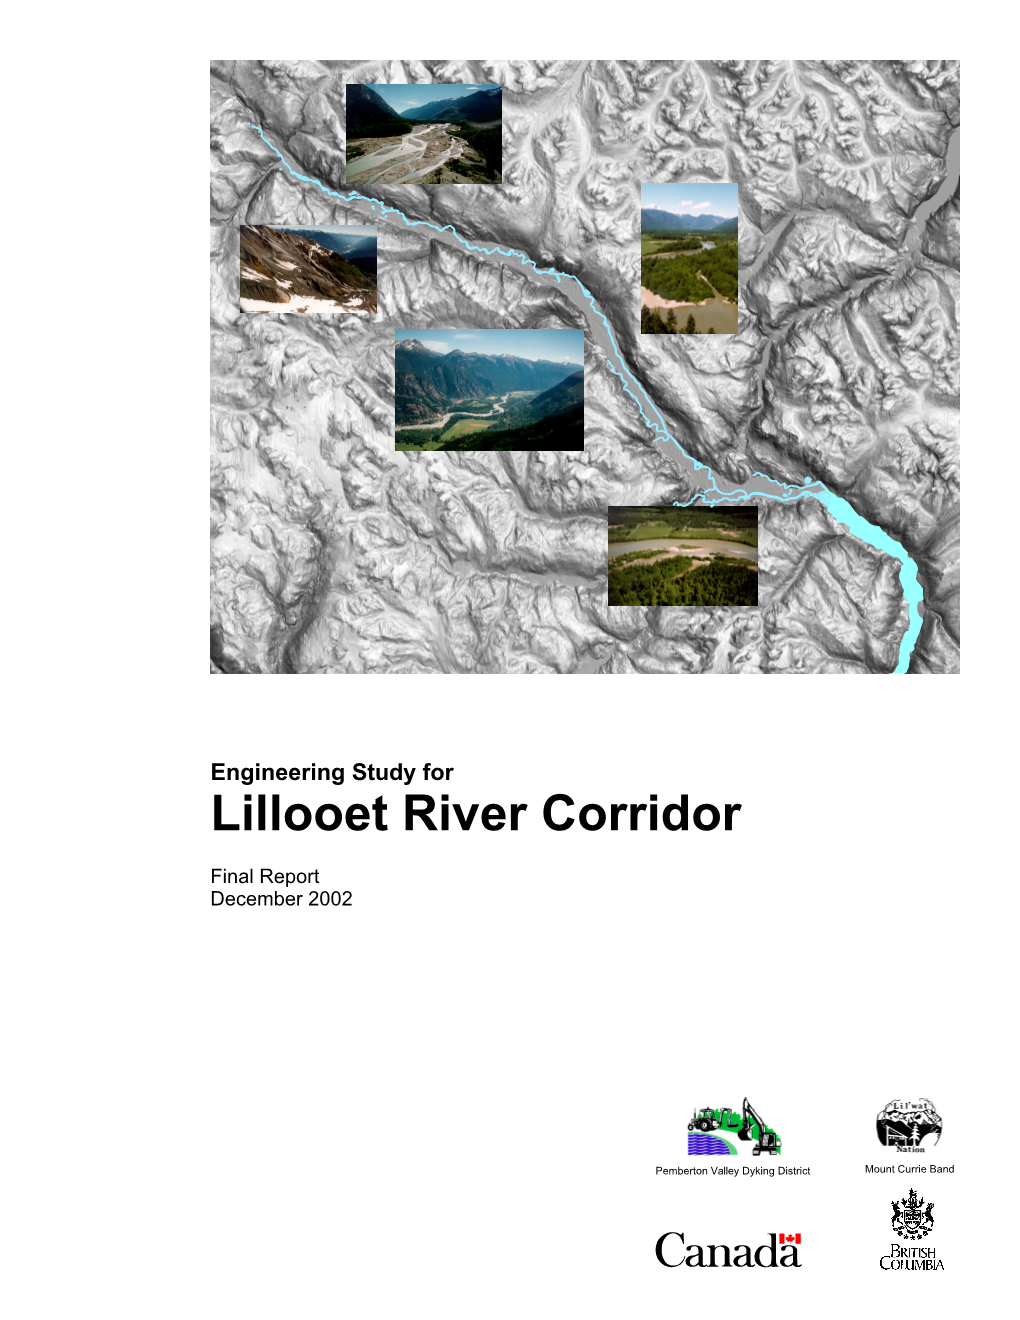 LILLOOET RIVER CORRIDOR Submission of Final Report Our File713.002